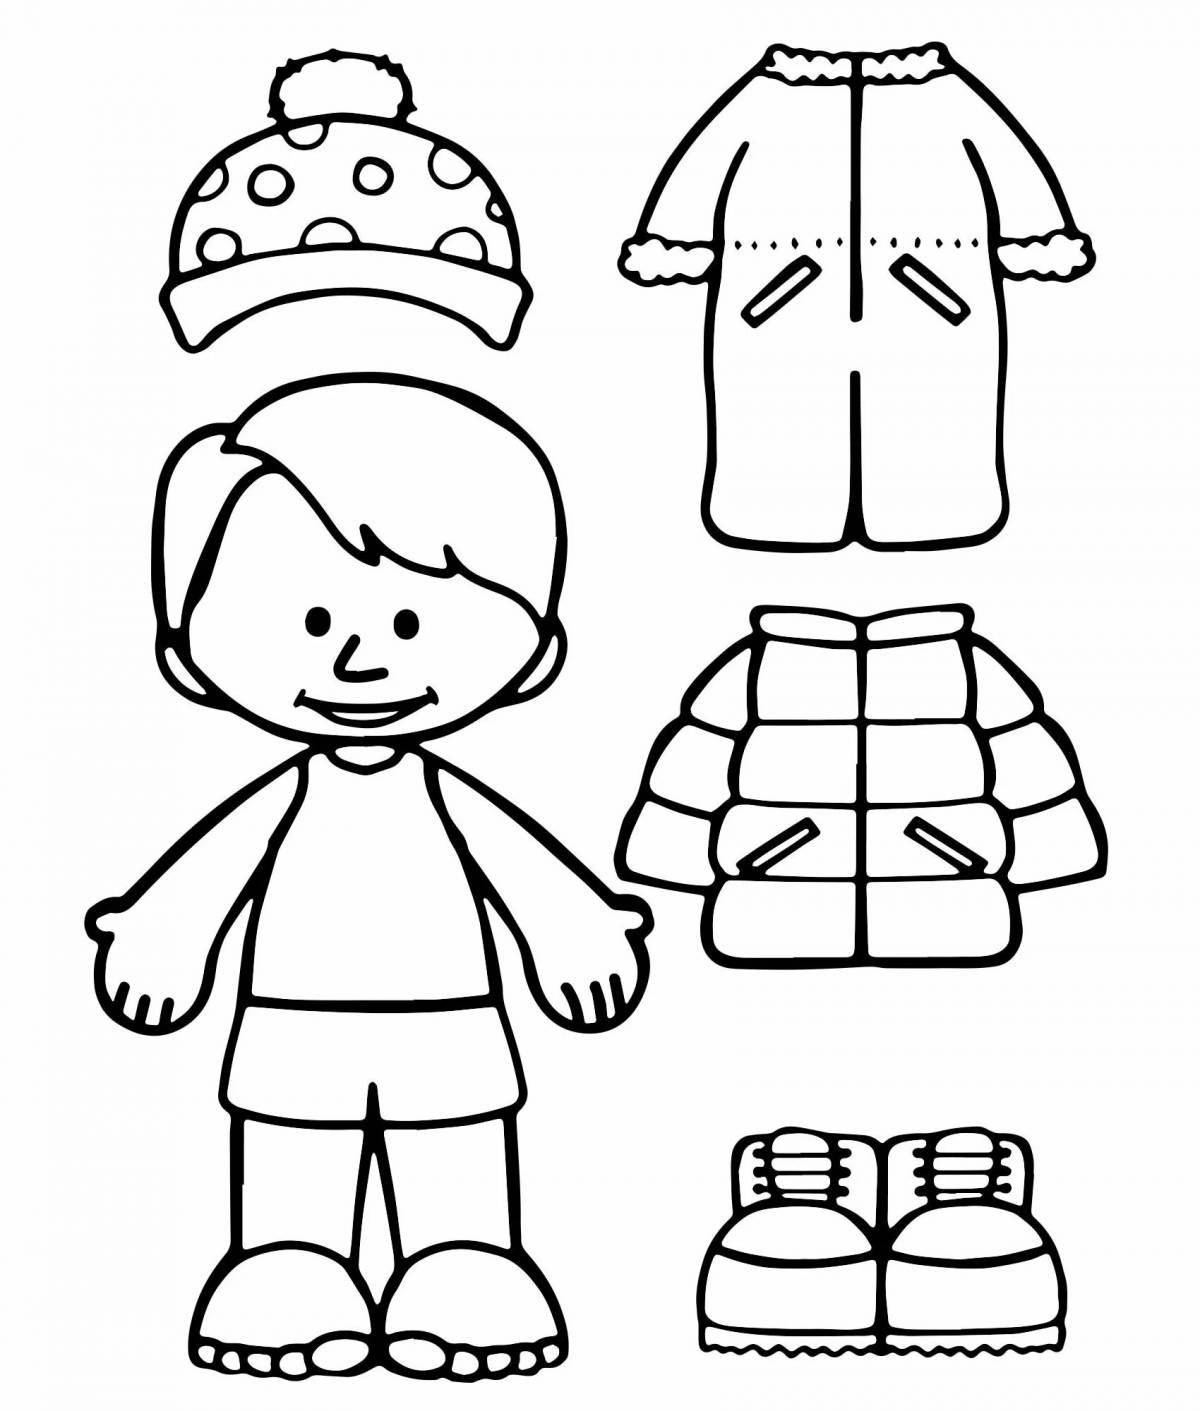 Winter clothes for kids #1